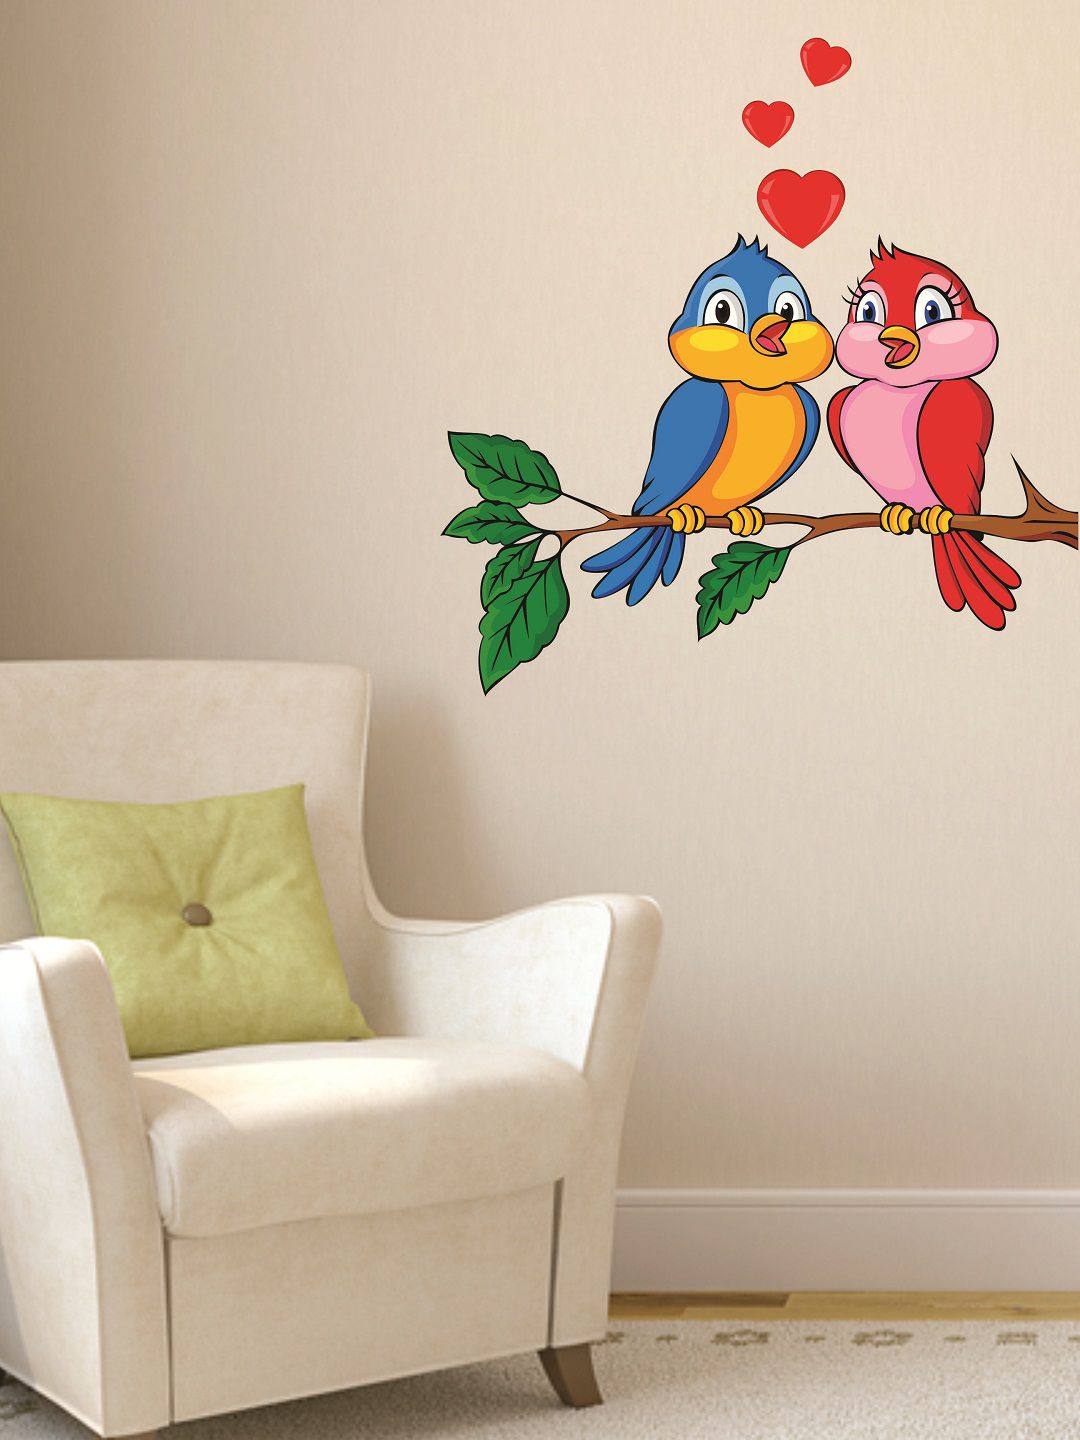 WALLSTICK Red & Blue Love Birds Large Vinyl Wall Sticker Price in India